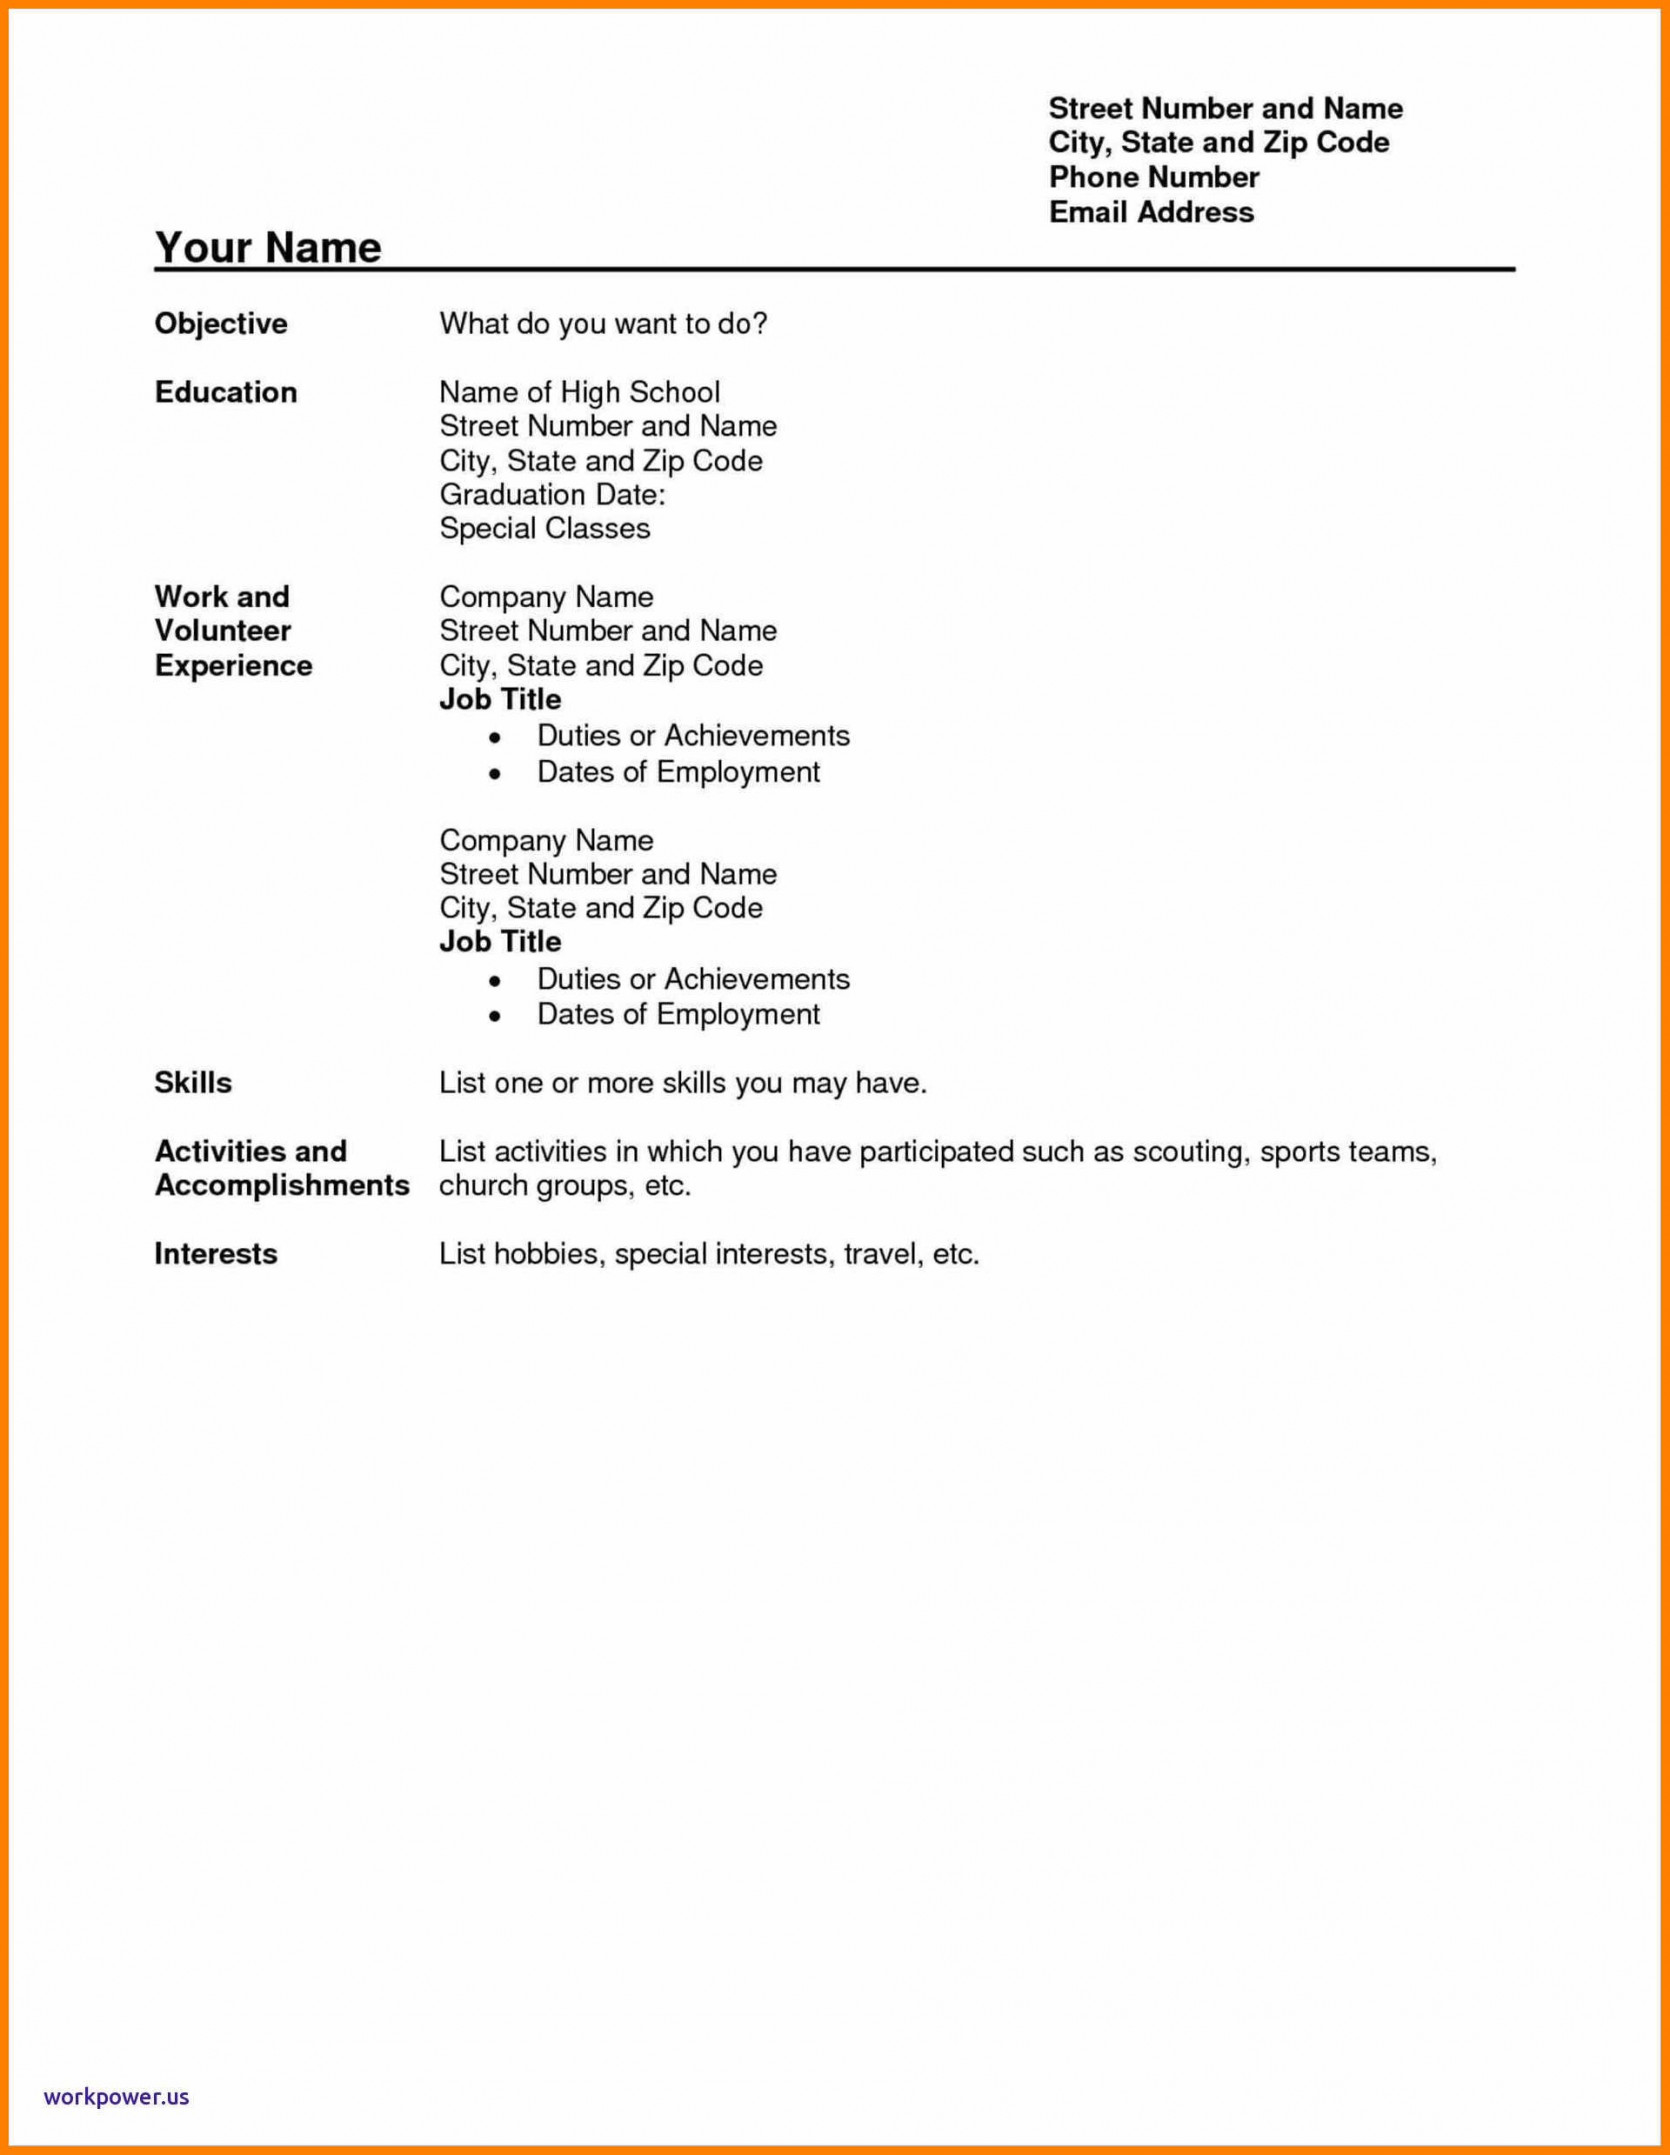 Functional Resume Template High School Student Resume Template No Experience Samples With Work No Experience Functional Resume functional resume template|wikiresume.com